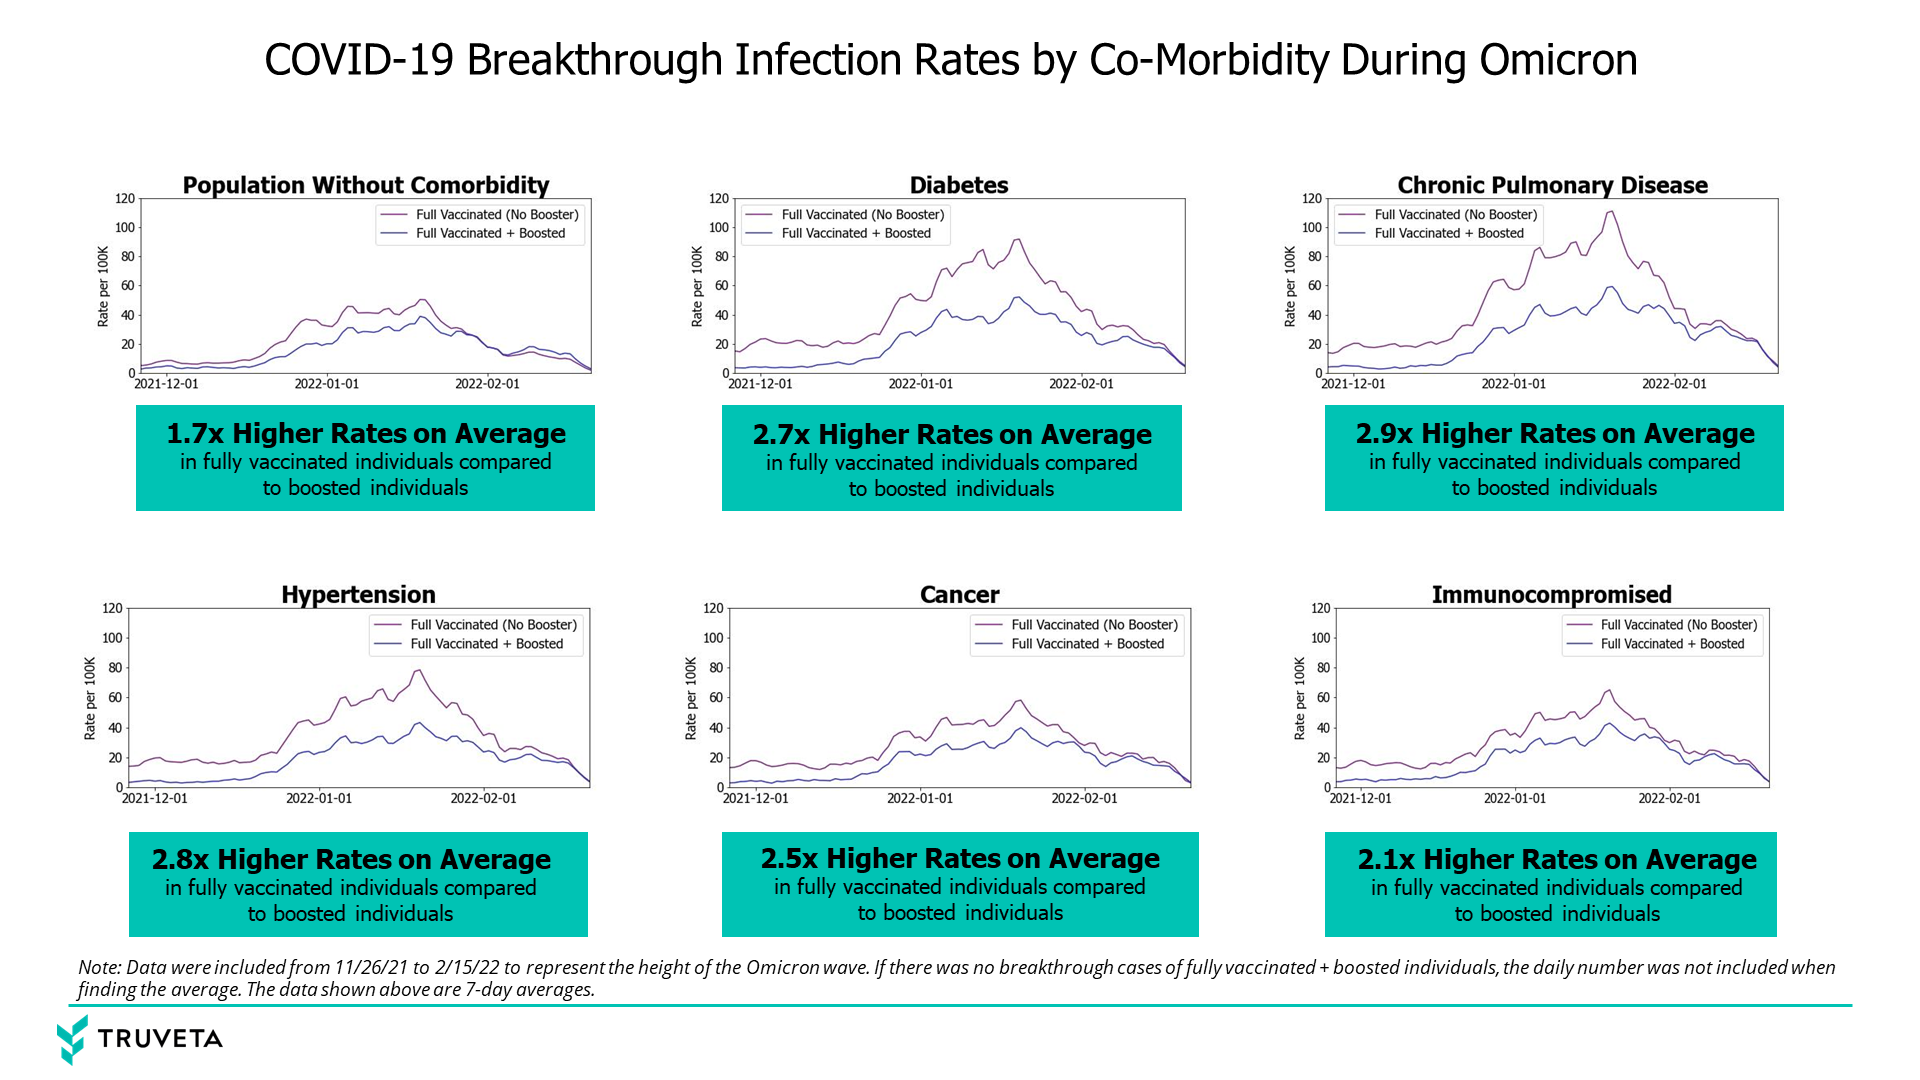 COVID-19 breakthrough infection rates by co-morbidity during Omicron wave